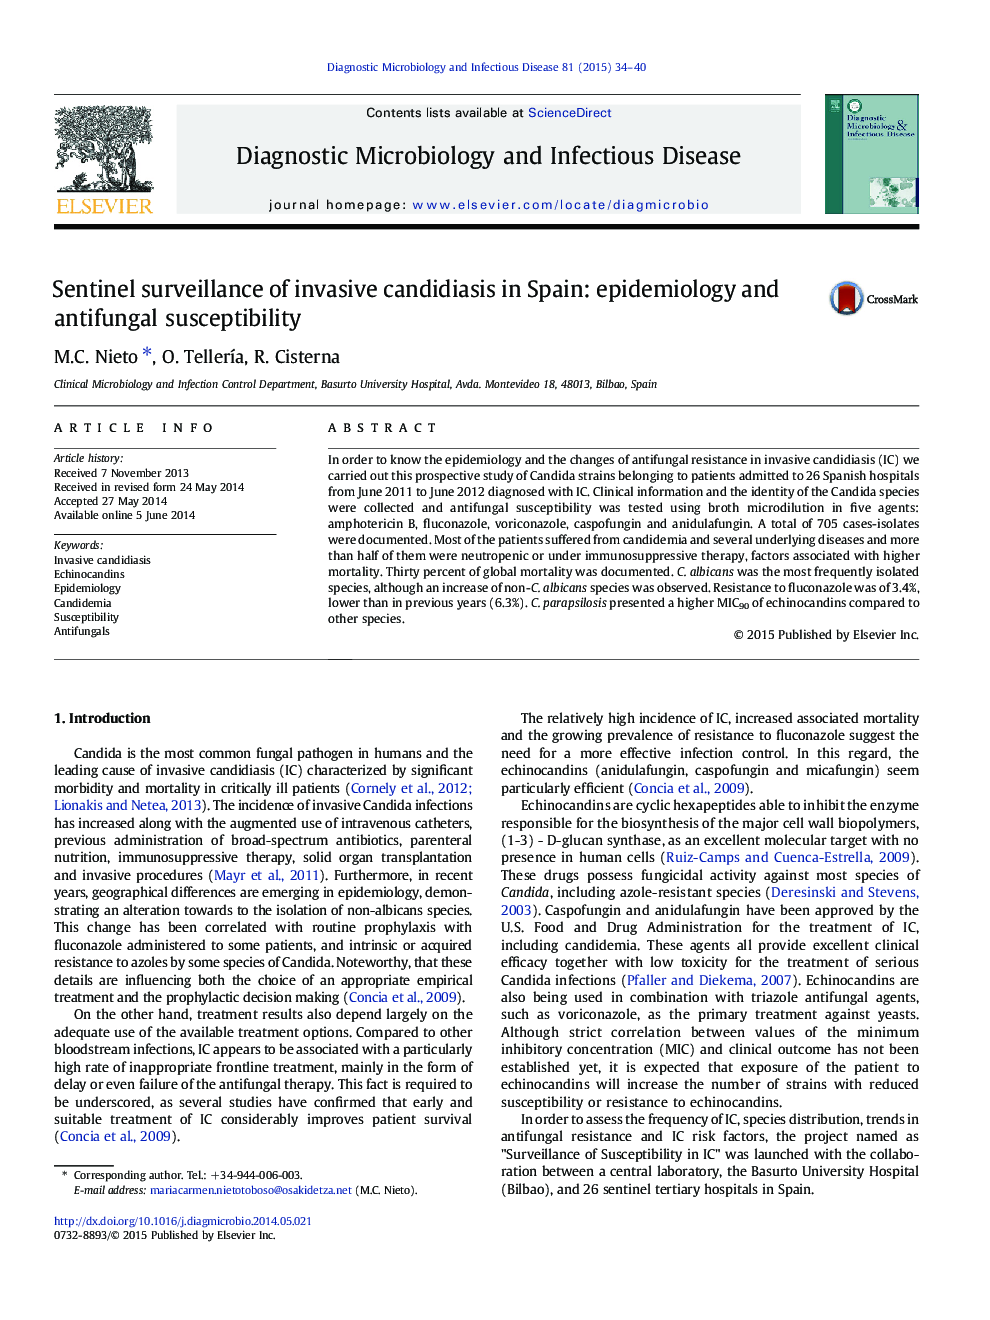 Sentinel surveillance of invasive candidiasis in Spain: epidemiology and antifungal susceptibility